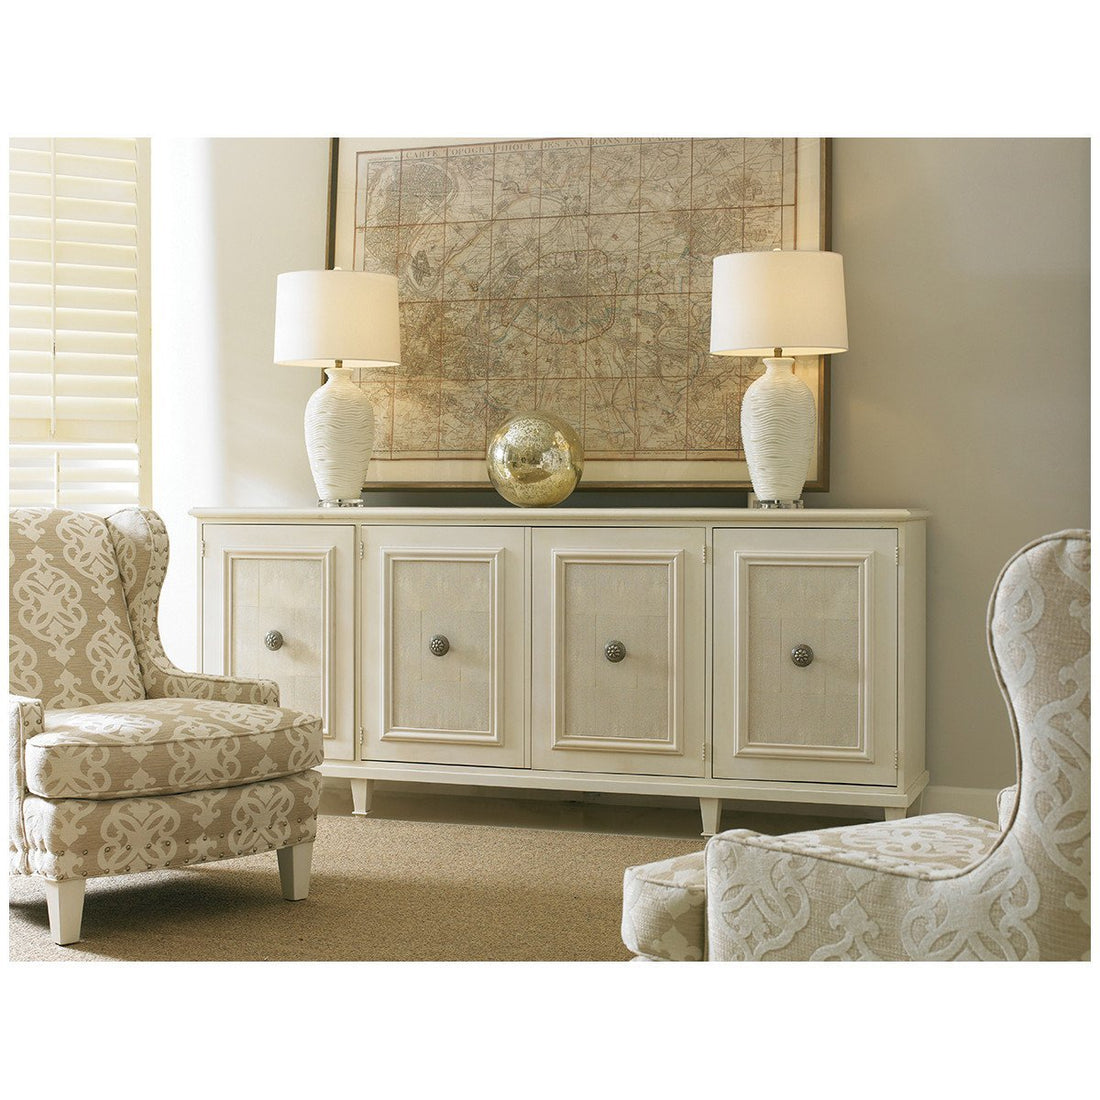 CTH Sherrill Occasional Naples Door Cabinet with Ivory Shagreen